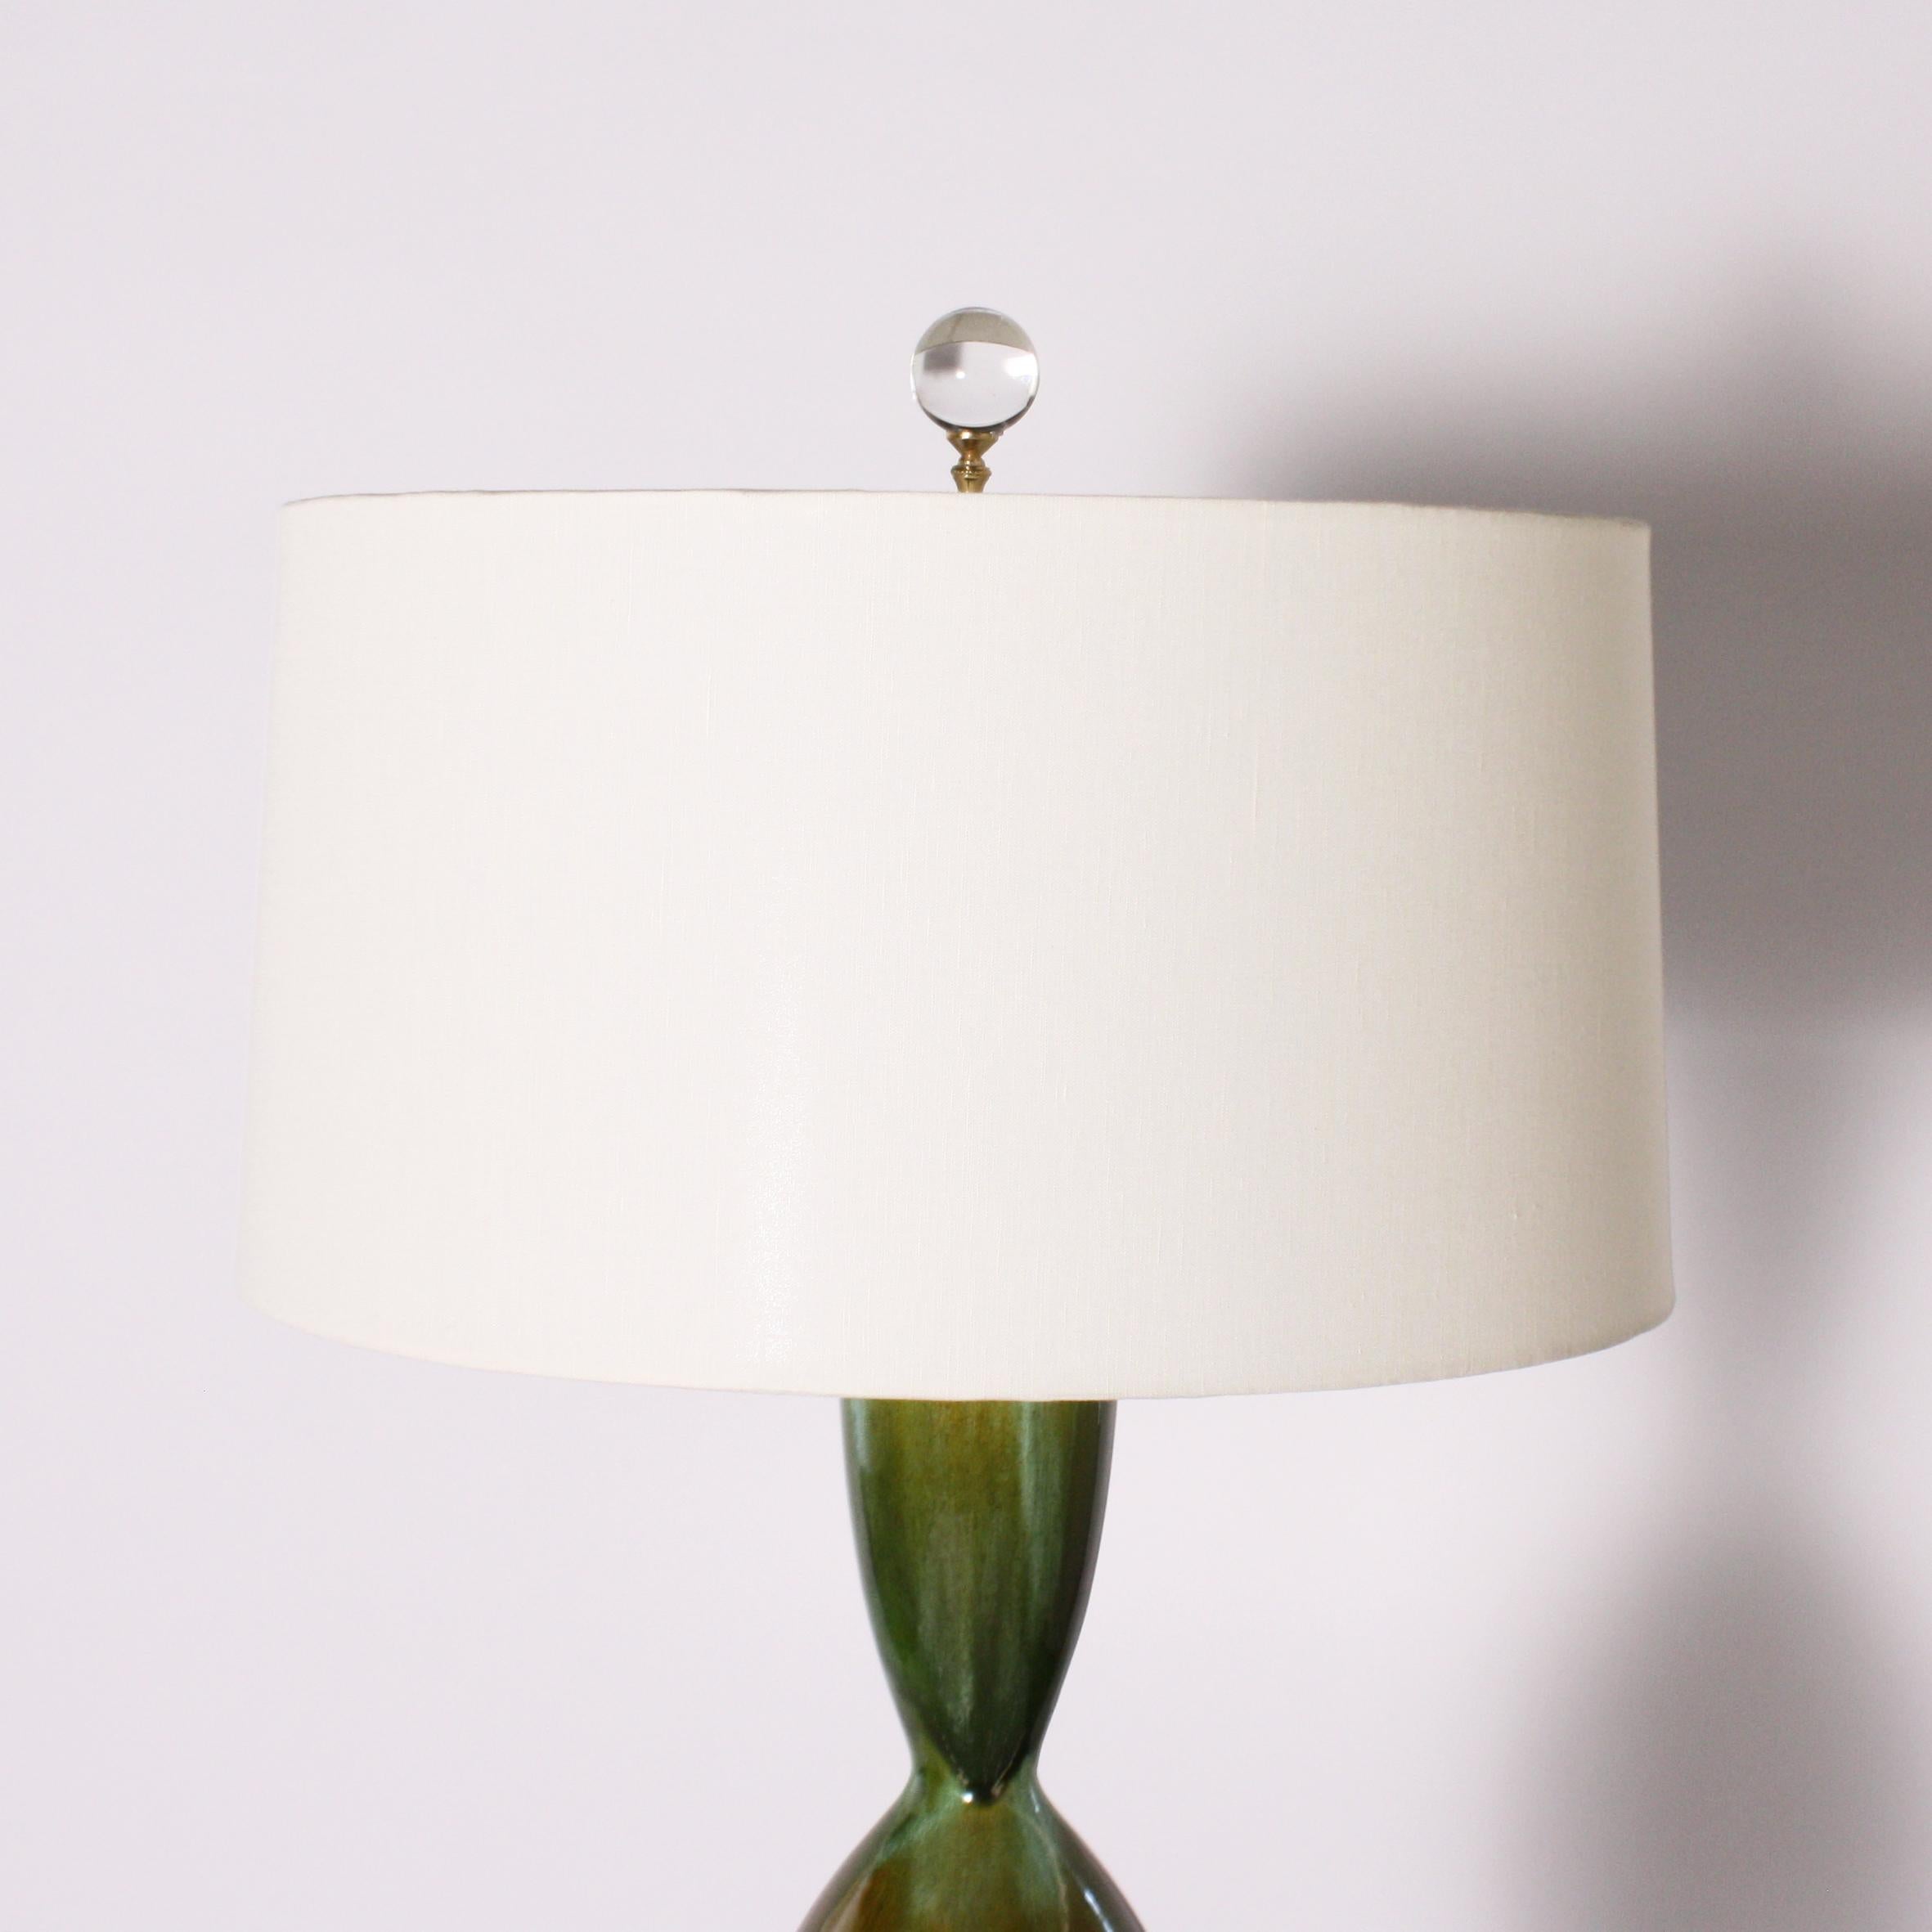 Green and blue ceramic lamp, circa 1960

Custom linen shade, crystal ball finial, Lucite base, and new gold twisted cording.